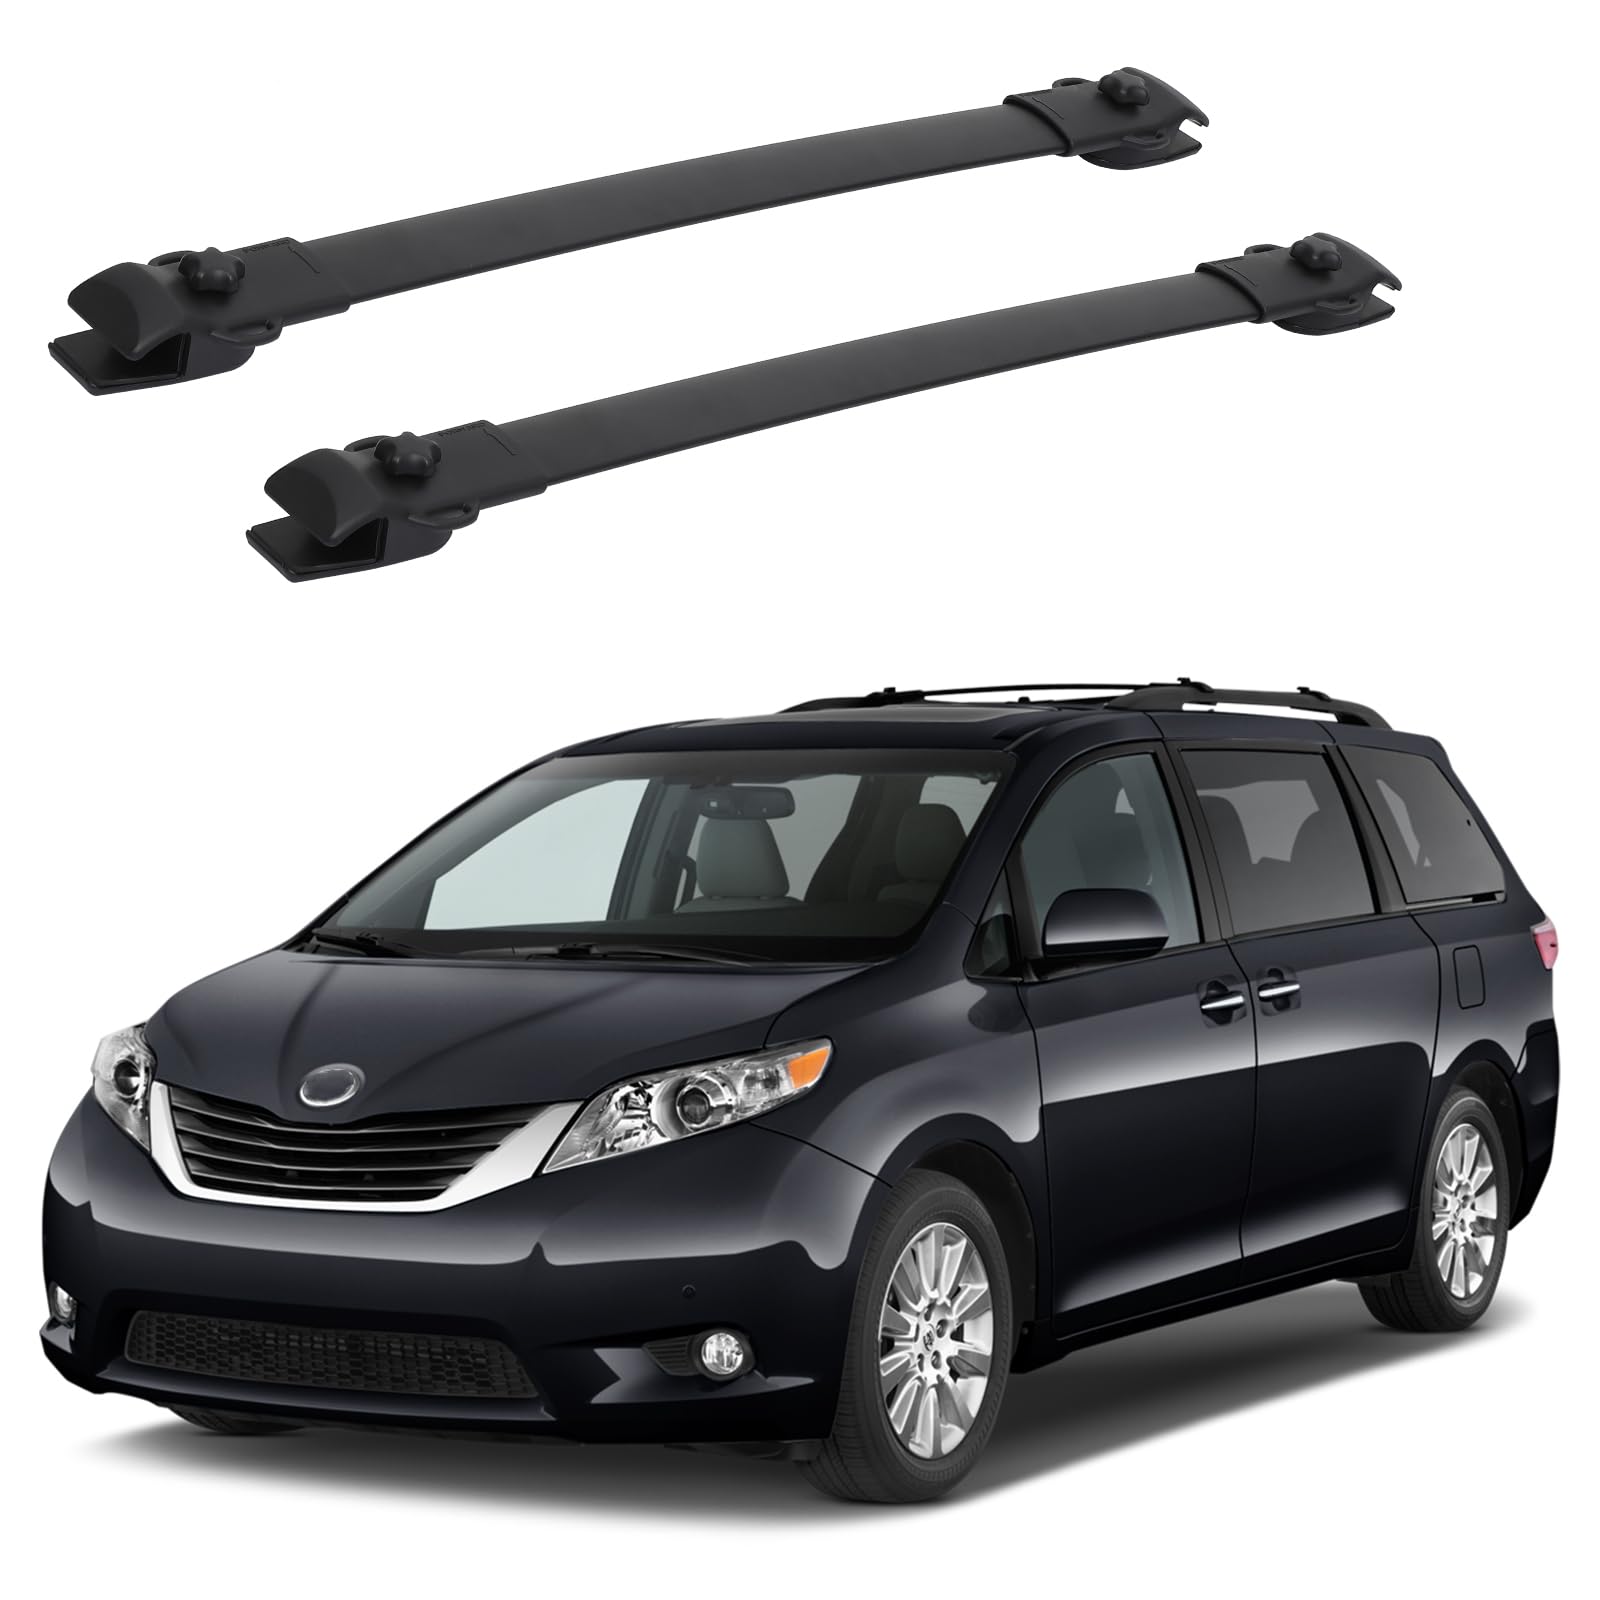 Roof Rack Cross Bar Fit for 2011-2020 Toyota Sienna,Alloy Steel